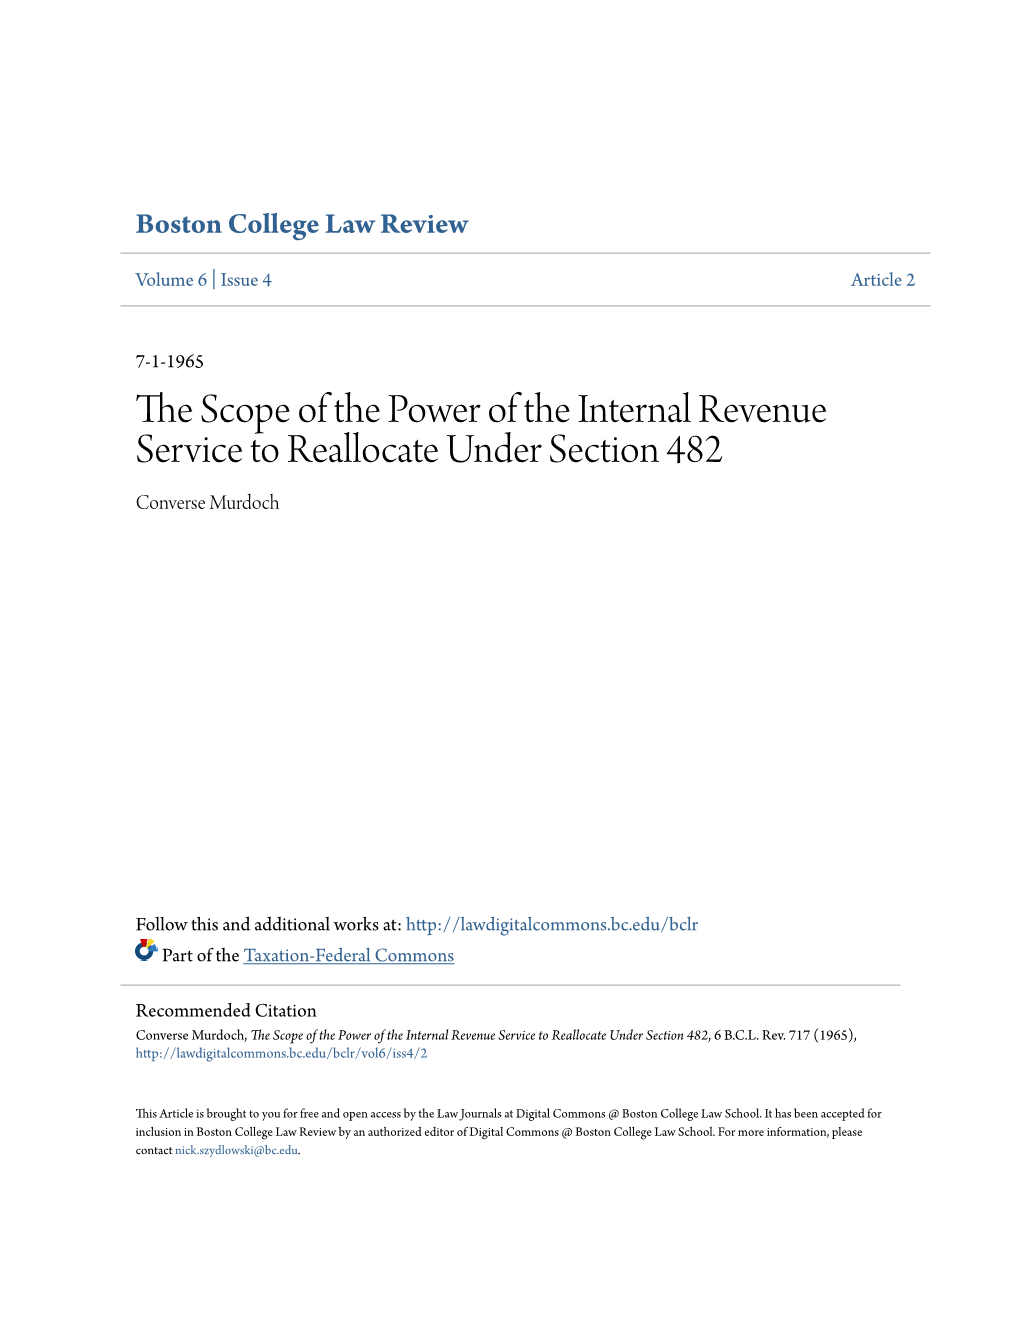 The Scope of the Power of the Internal Revenue Service to Reallocate Under Section 482, 6 B.C.L